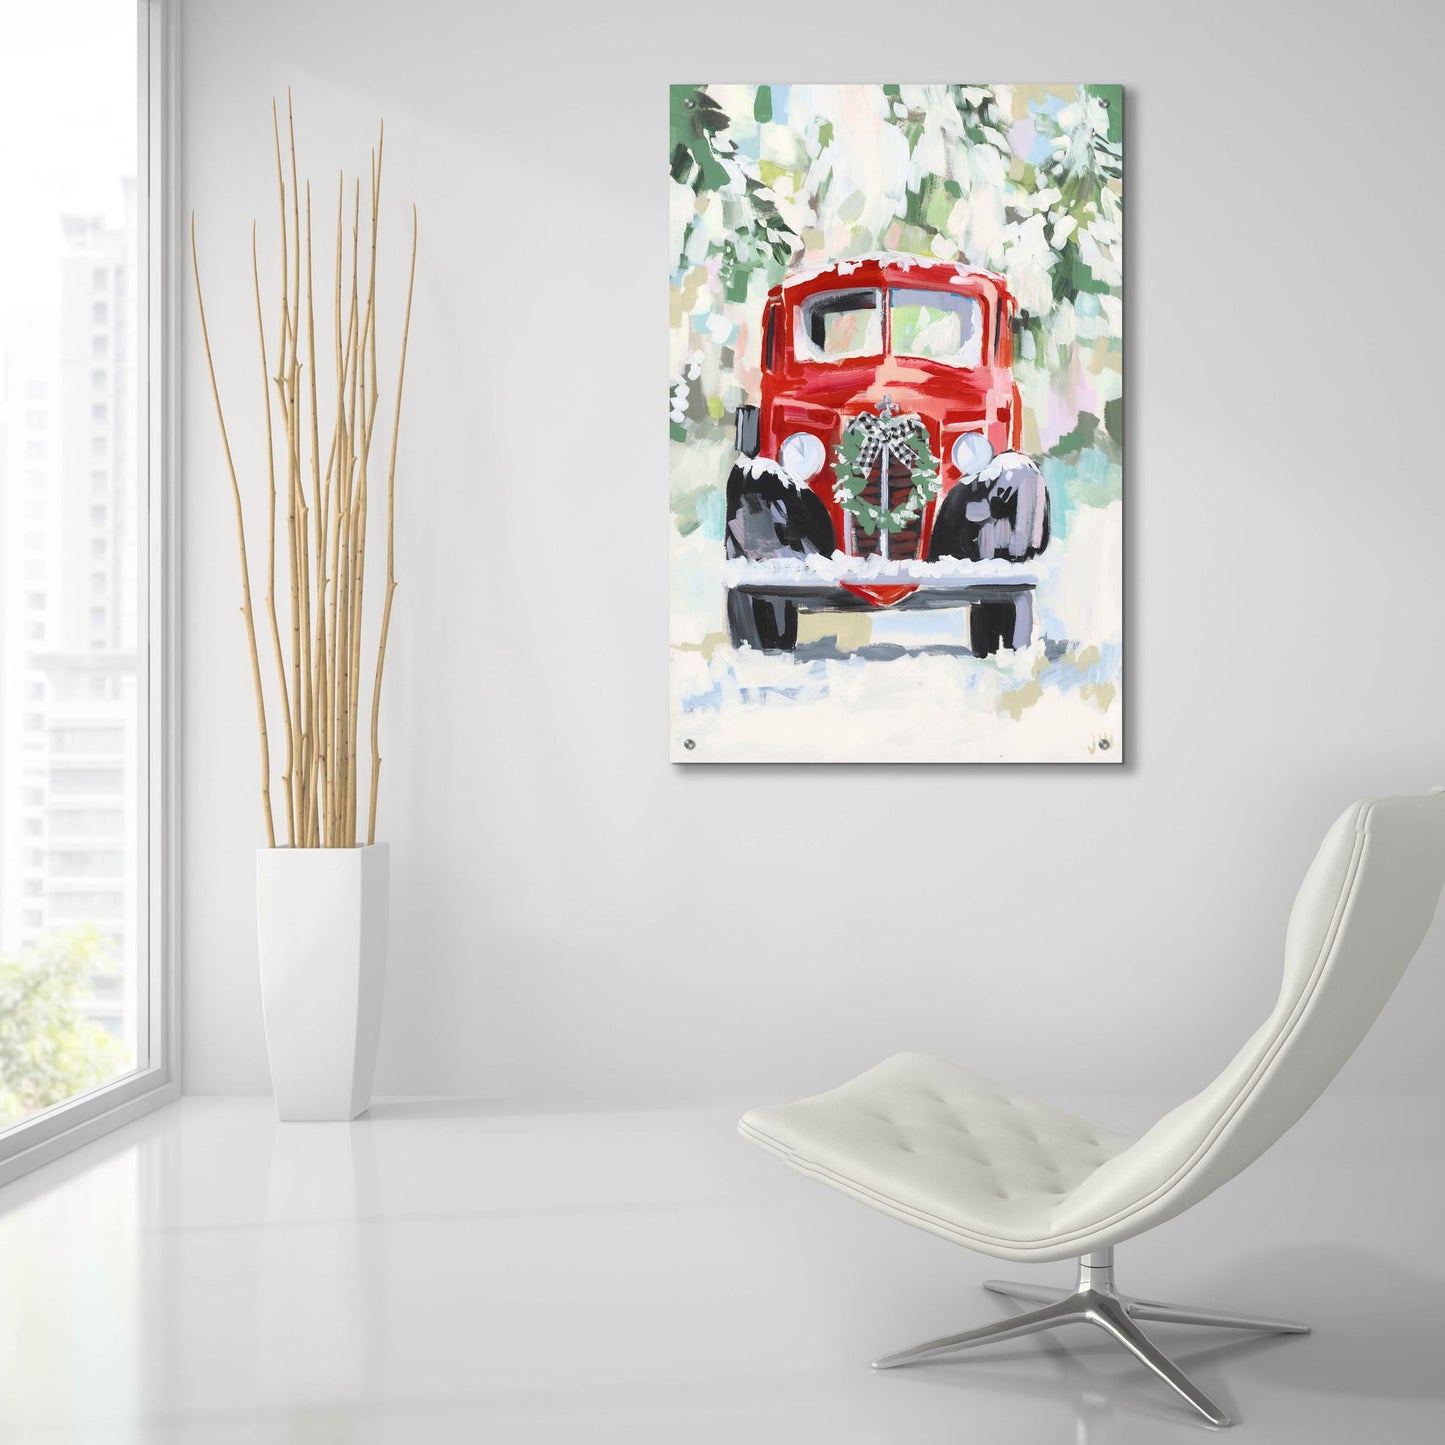 Epic Art 'Red Vintage Truck with Wreath' by Jenny Westenhofer, Acrylic Glass Wall Art,24x36